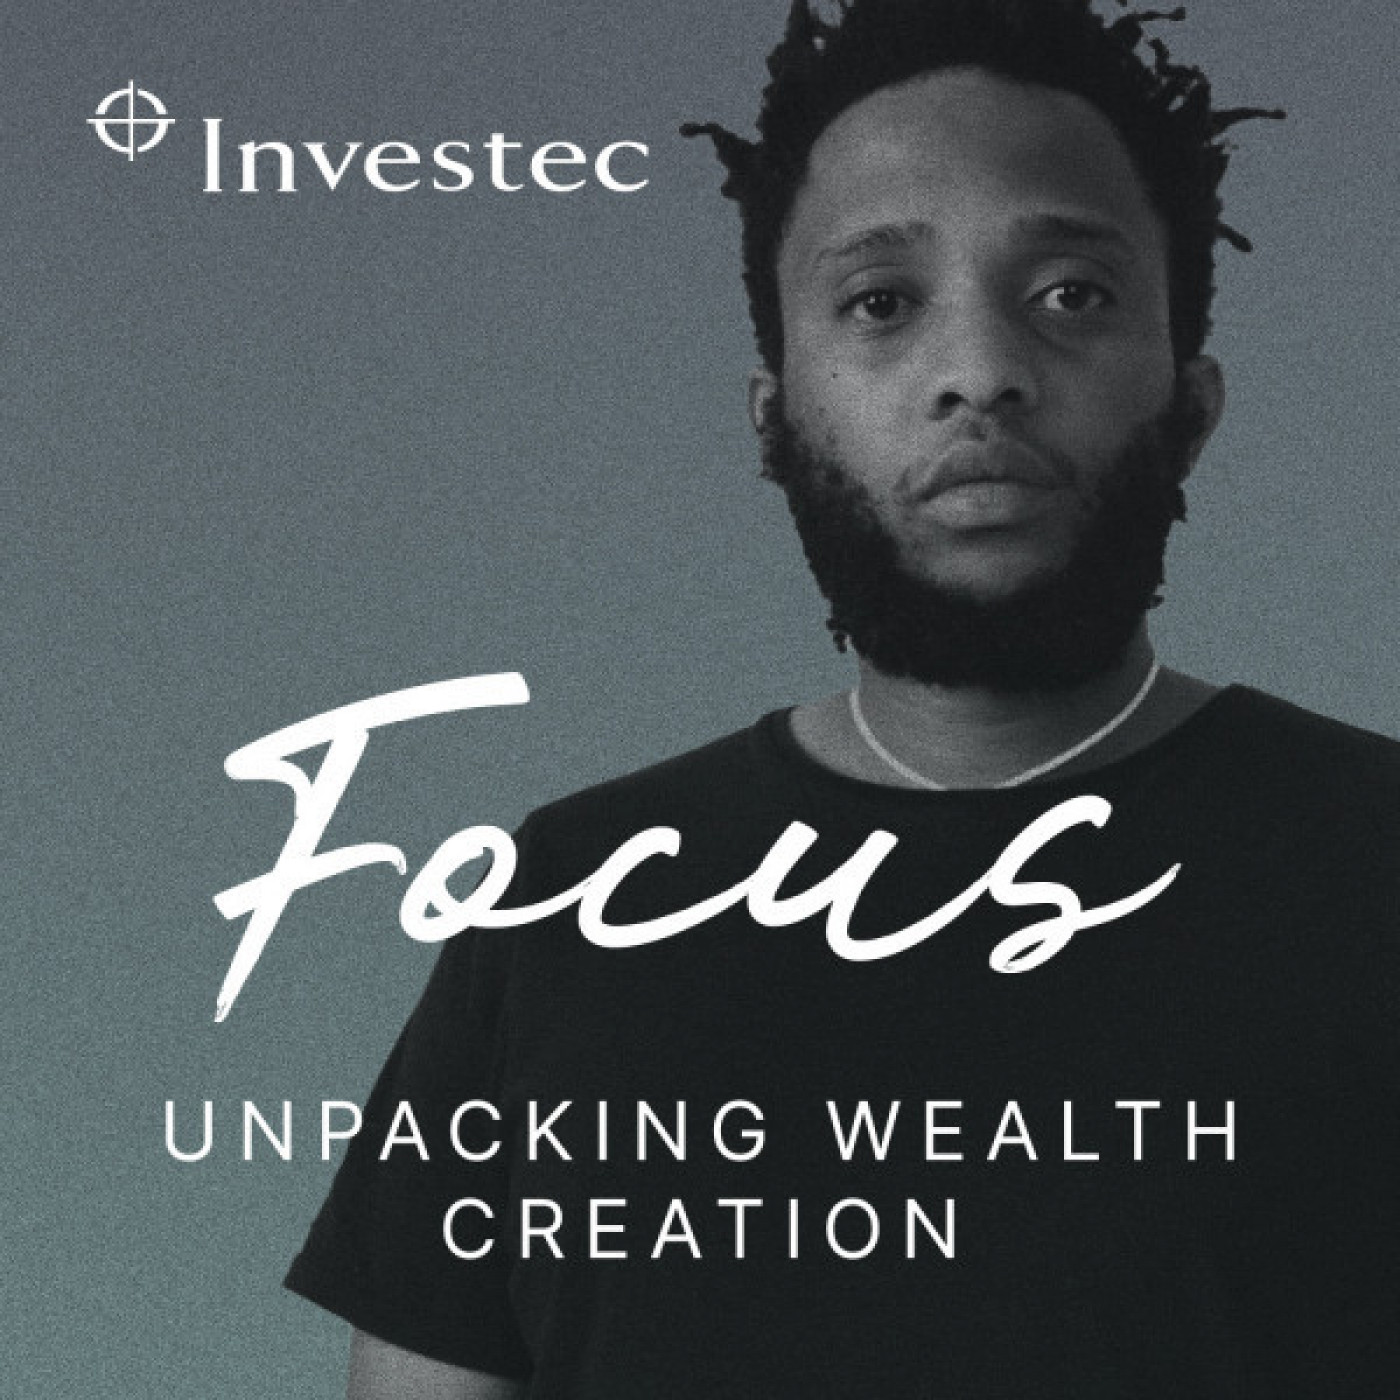 Unpacking Wealth Creation S2 Ep7: Why do I need life insurance?